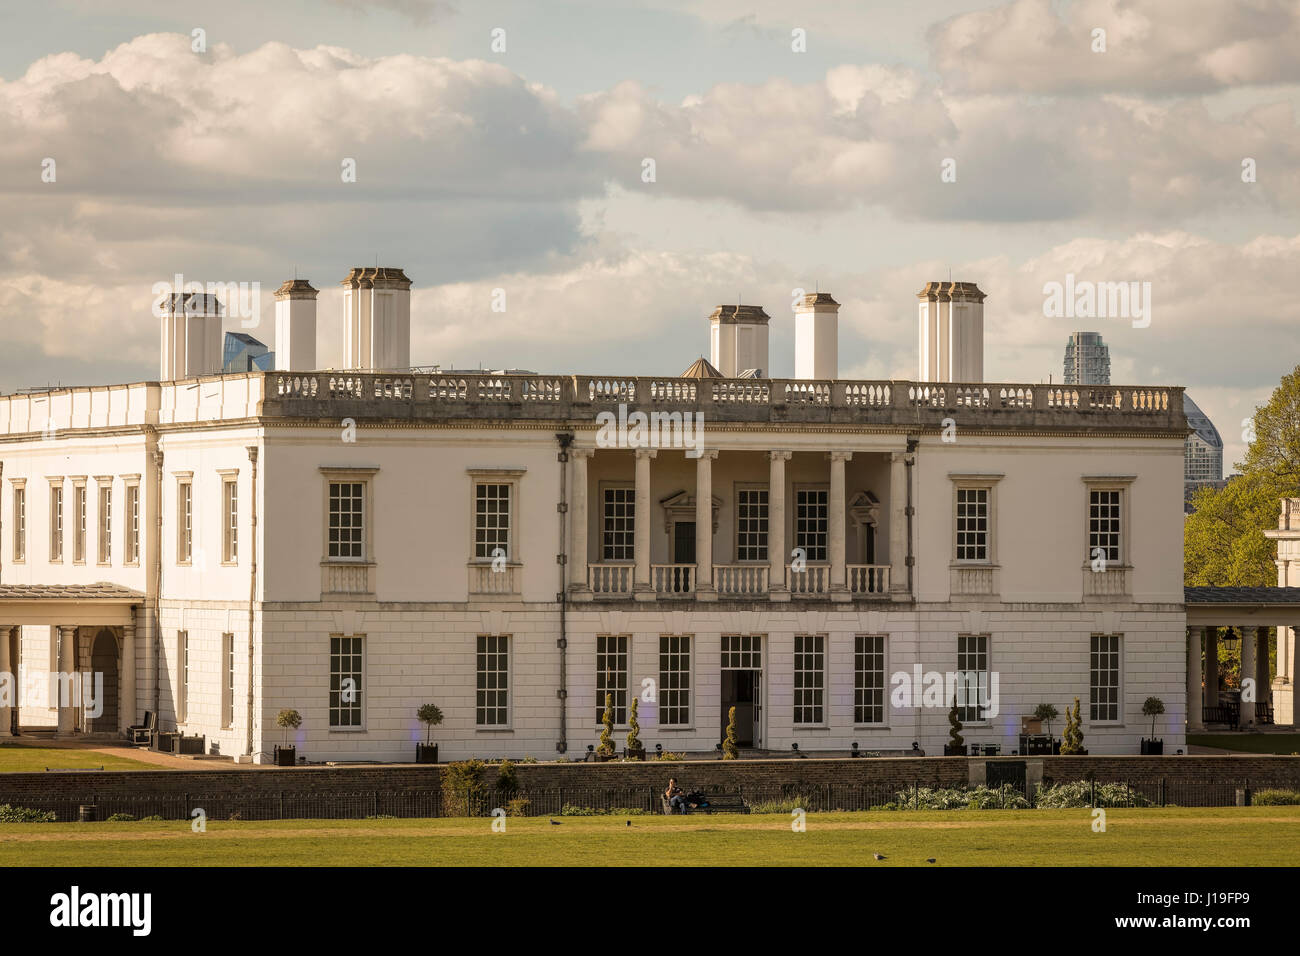 Queen's House Greenwich Palladian Architecture Building Stock Photo